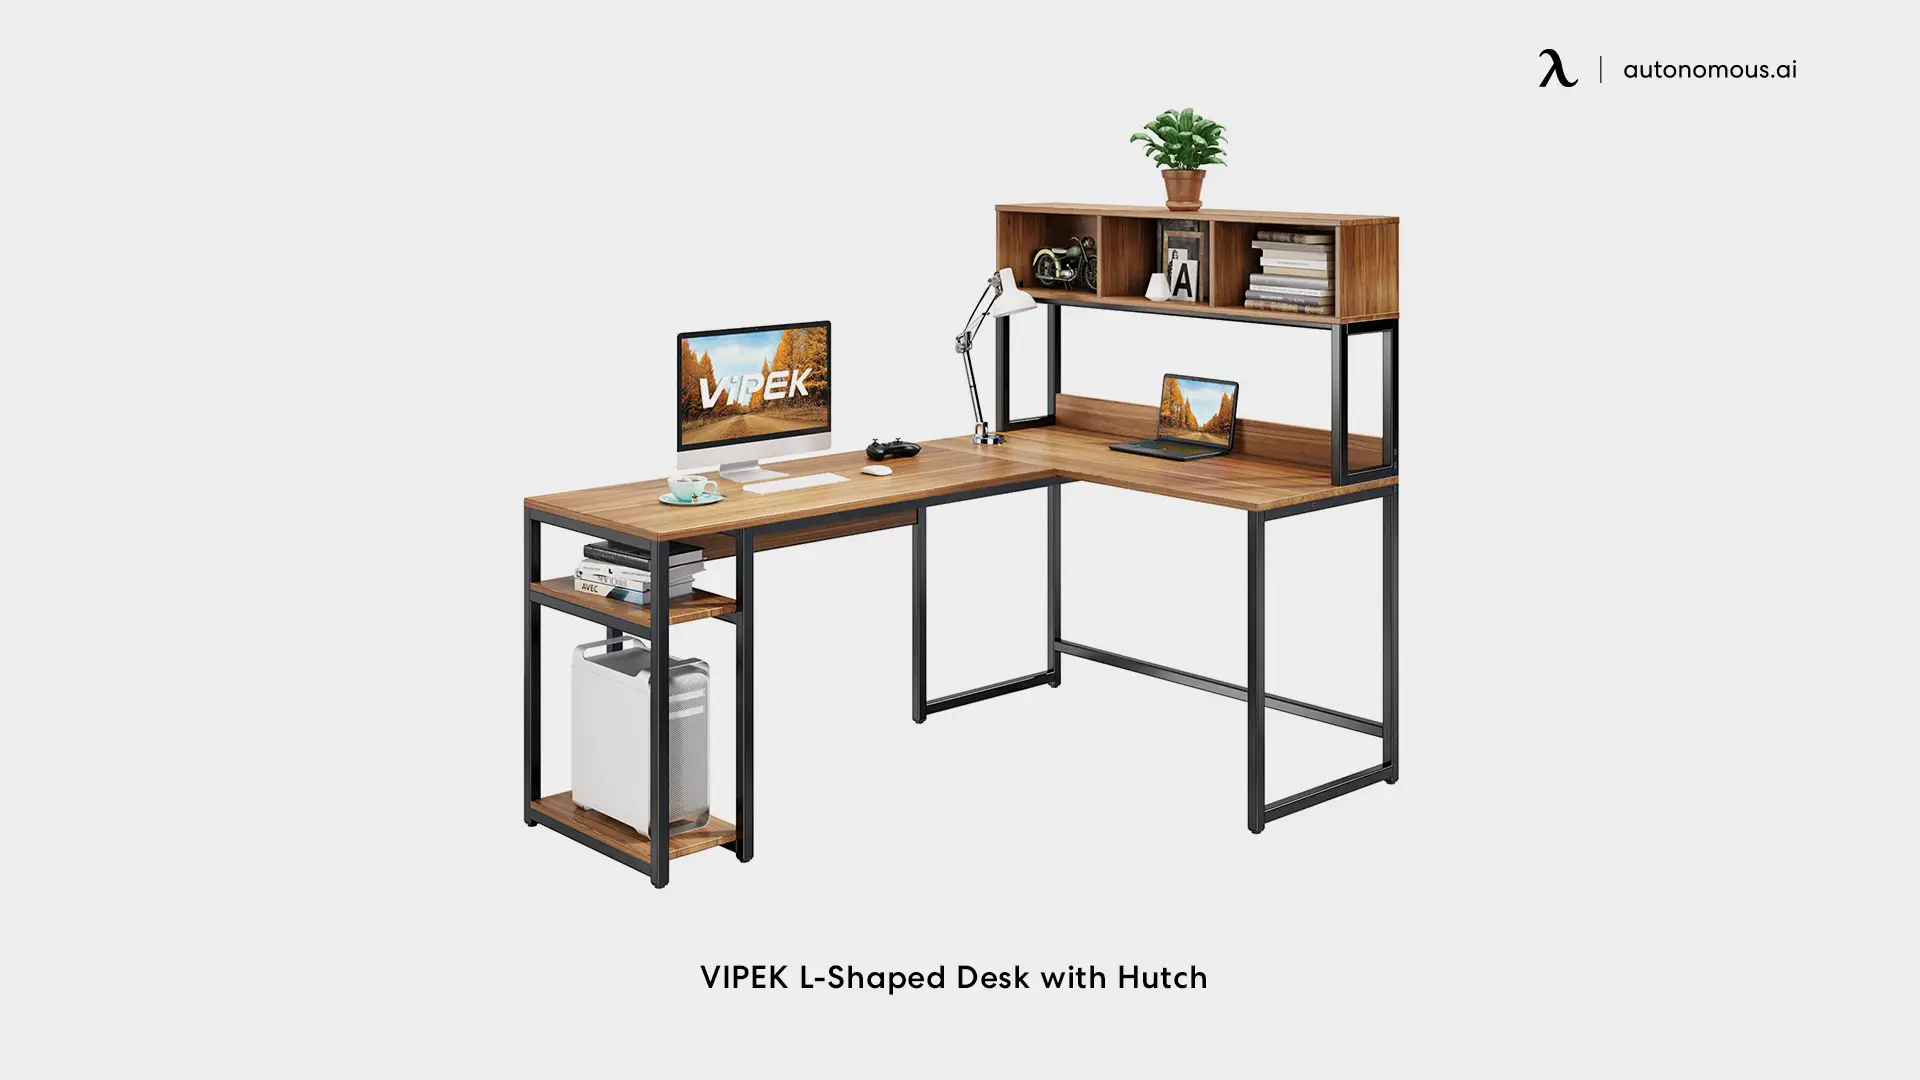 VIPEK L-Shaped Desk with Hutch